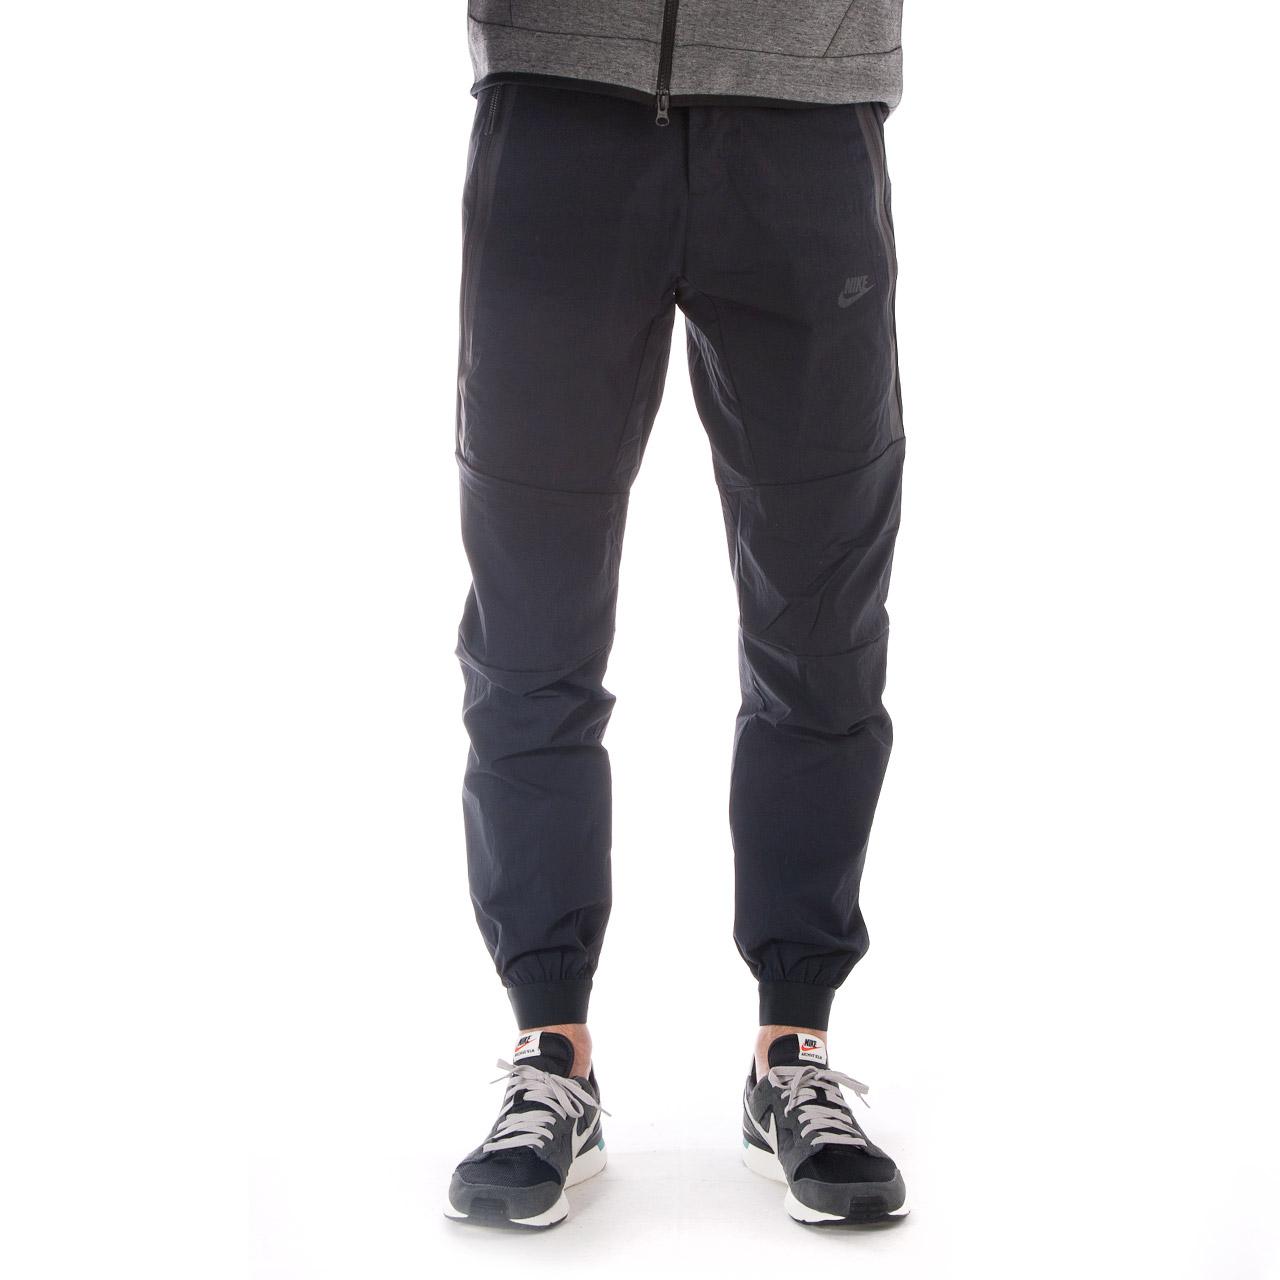 Nike Synthetic Nike Bonded Woven Pant 2.0 in Black for Men - Lyst